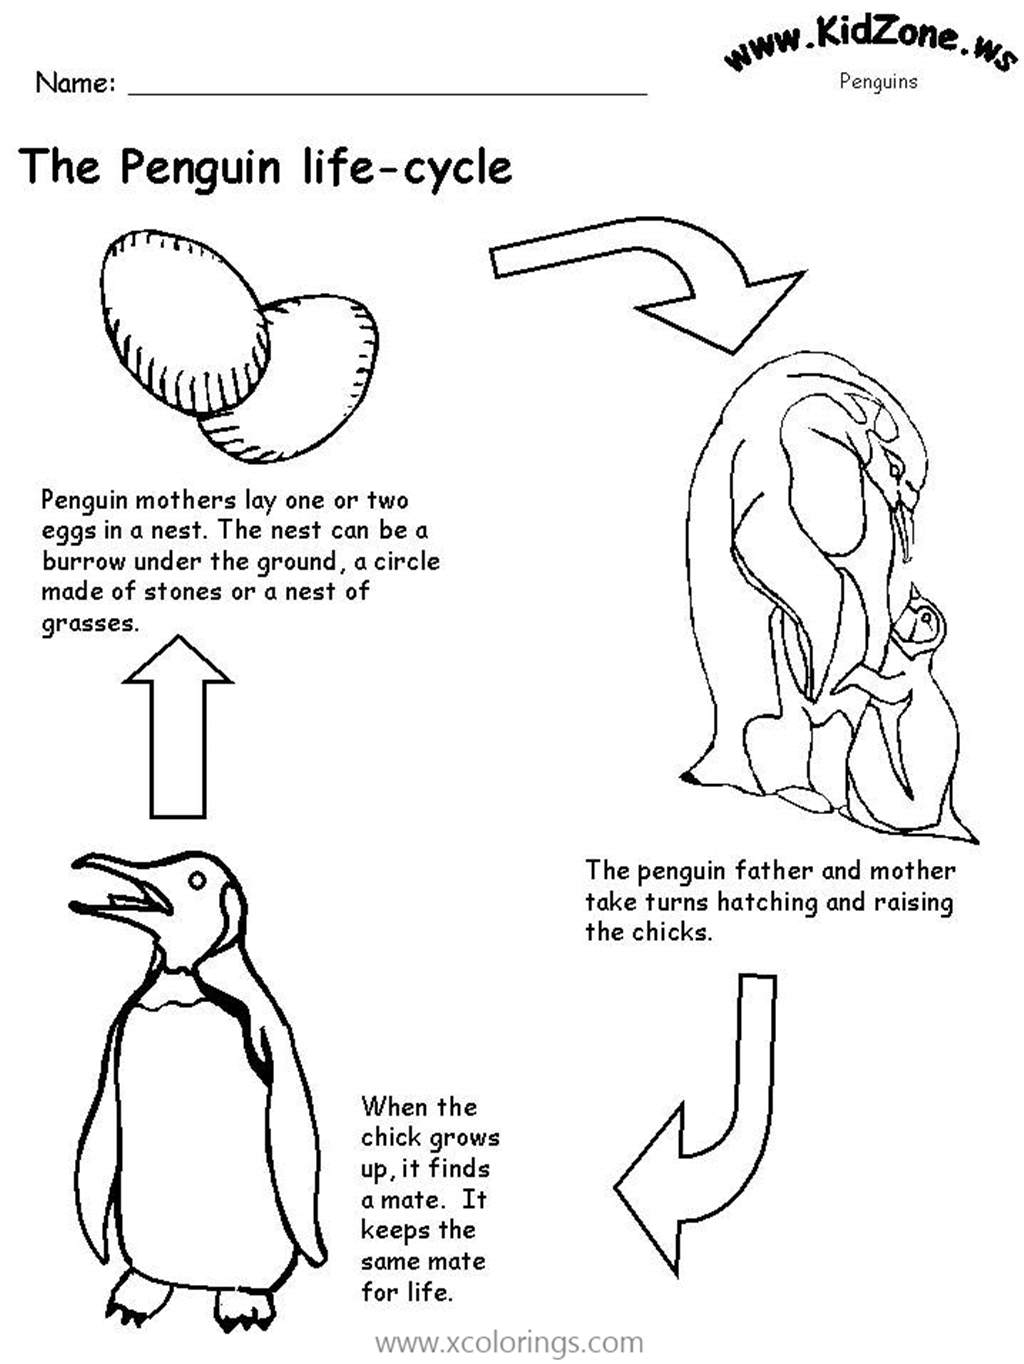 Free Penguin Life Cycle Coloring Pages printable